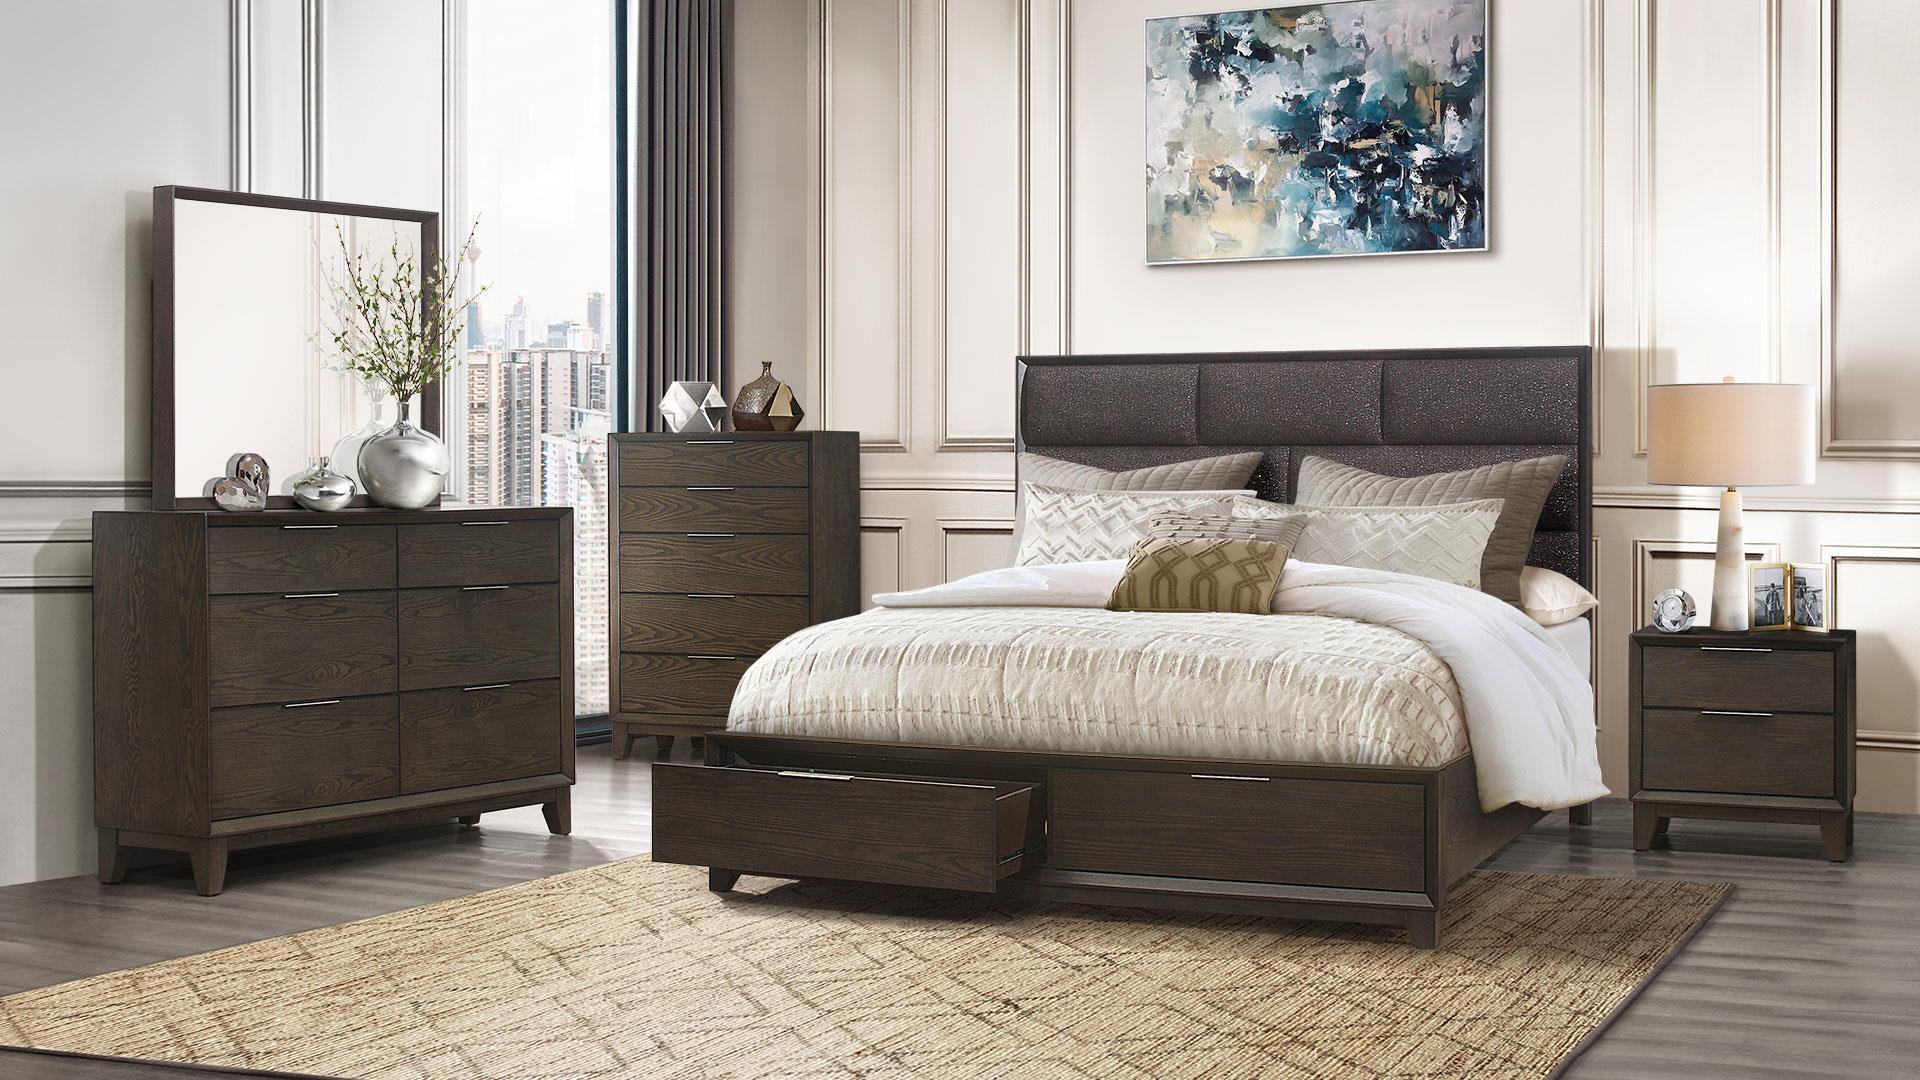 Contemporary Platform Bedroom Set WILLOW WILLOW-QB-Set-6 in Gray, Chocolate Fabric